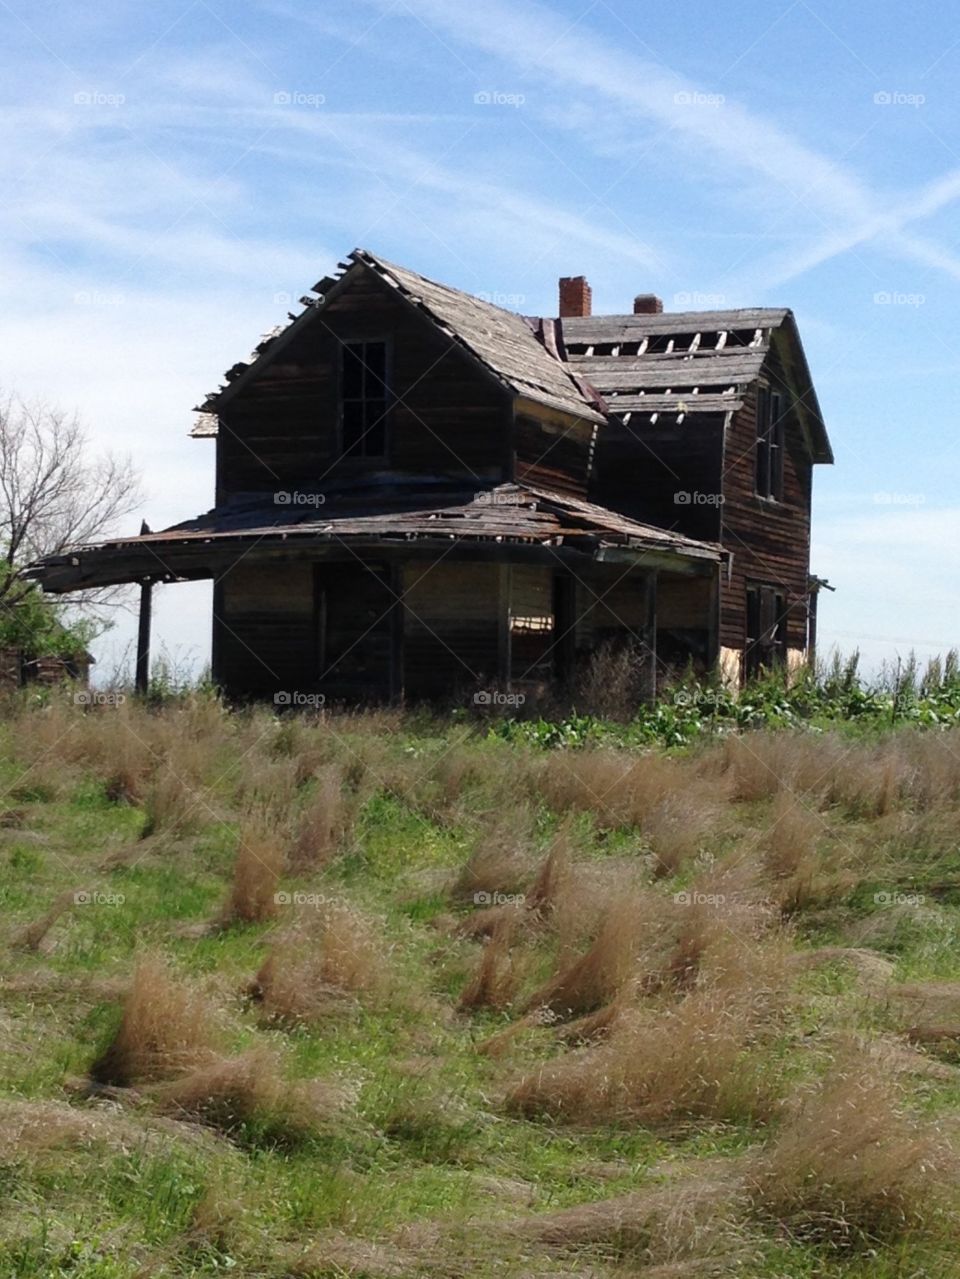 Moved on. An old abandoned farm house.